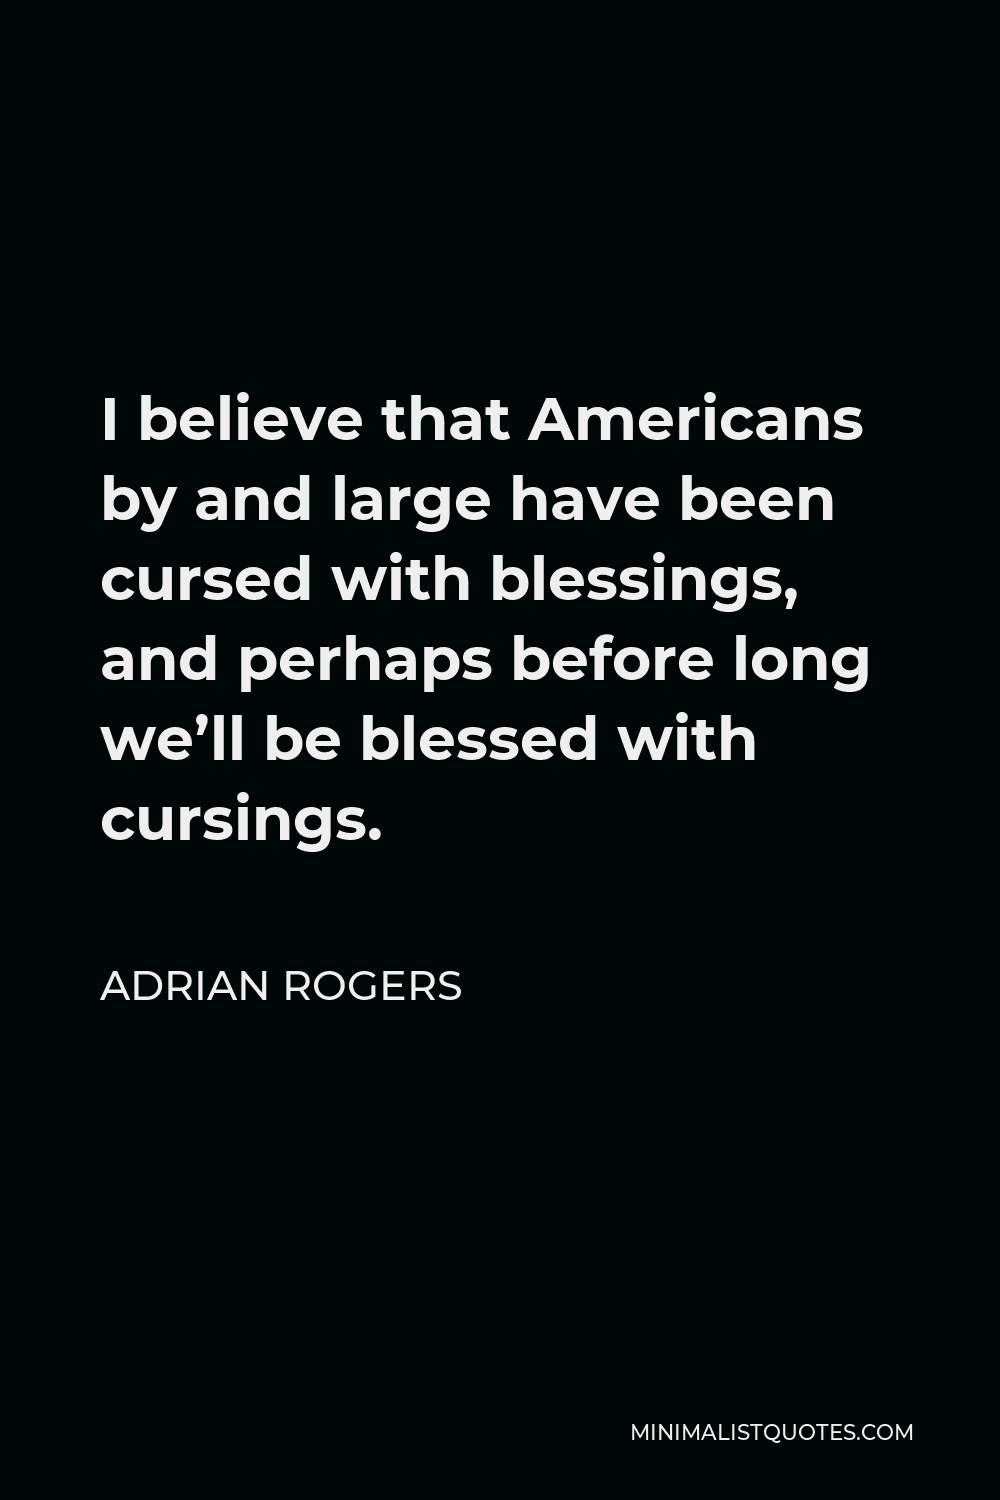 Adrian Rogers Quote - I believe that Americans by and large have been cursed with blessings, and perhaps before long we’ll be blessed with cursings.